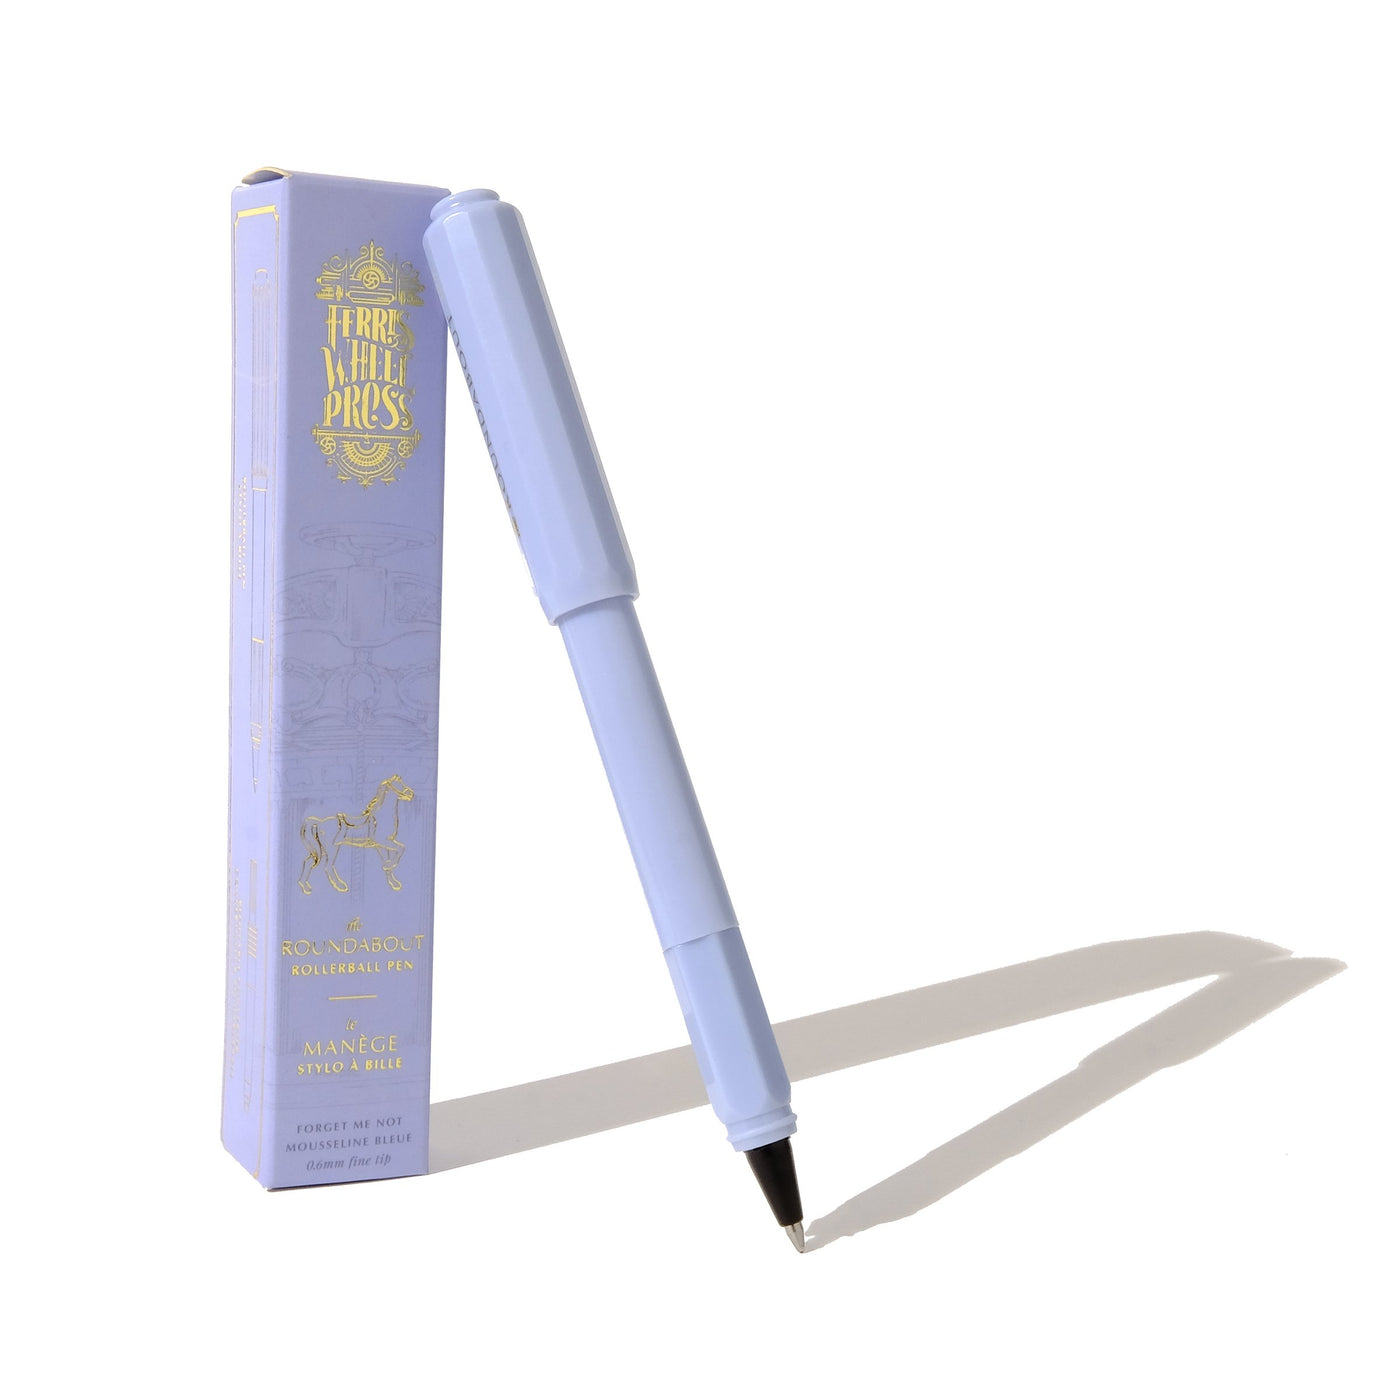 Ferris Wheel Press Roundabout Rollerball Pen - Forget Me Not | Atlas Stationers.